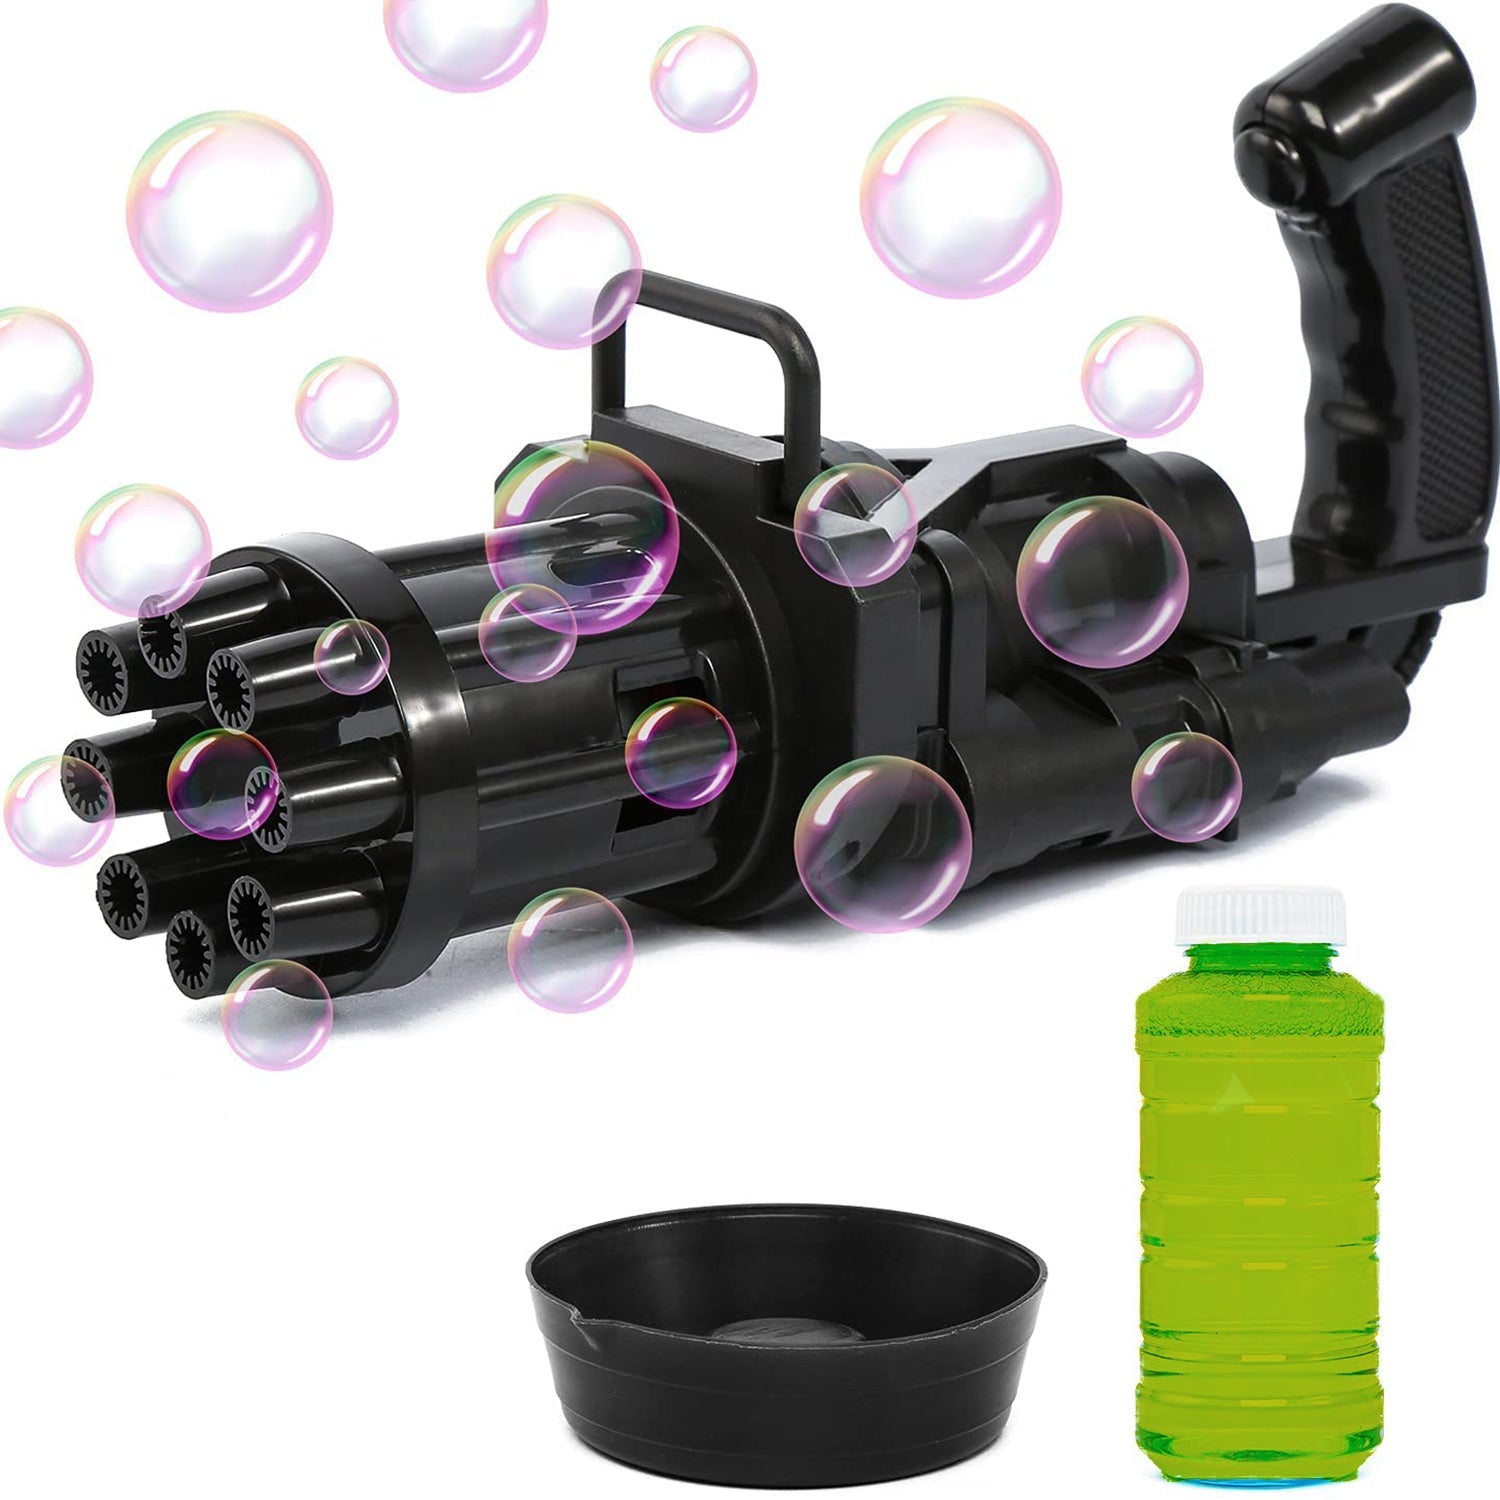 8-Hole battery operated Bubbles Gun Toys for Boys and Girls (1Pc Only)